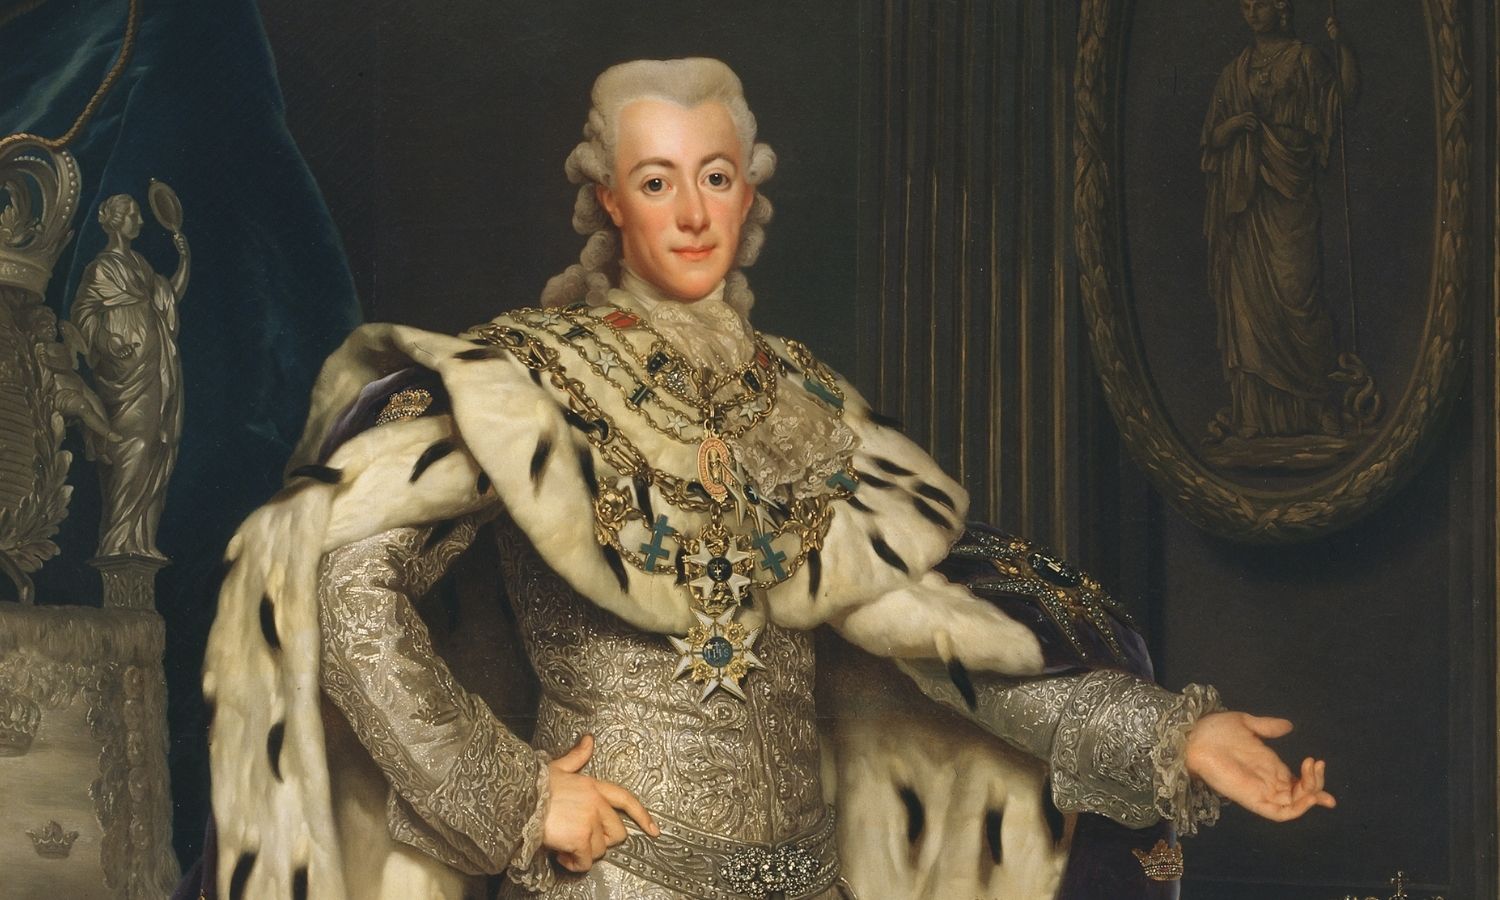 OTD in 1792: King Gustav III of Sweden was shot during a masquerade ball at the Royal Opera Hall in Stockholm.